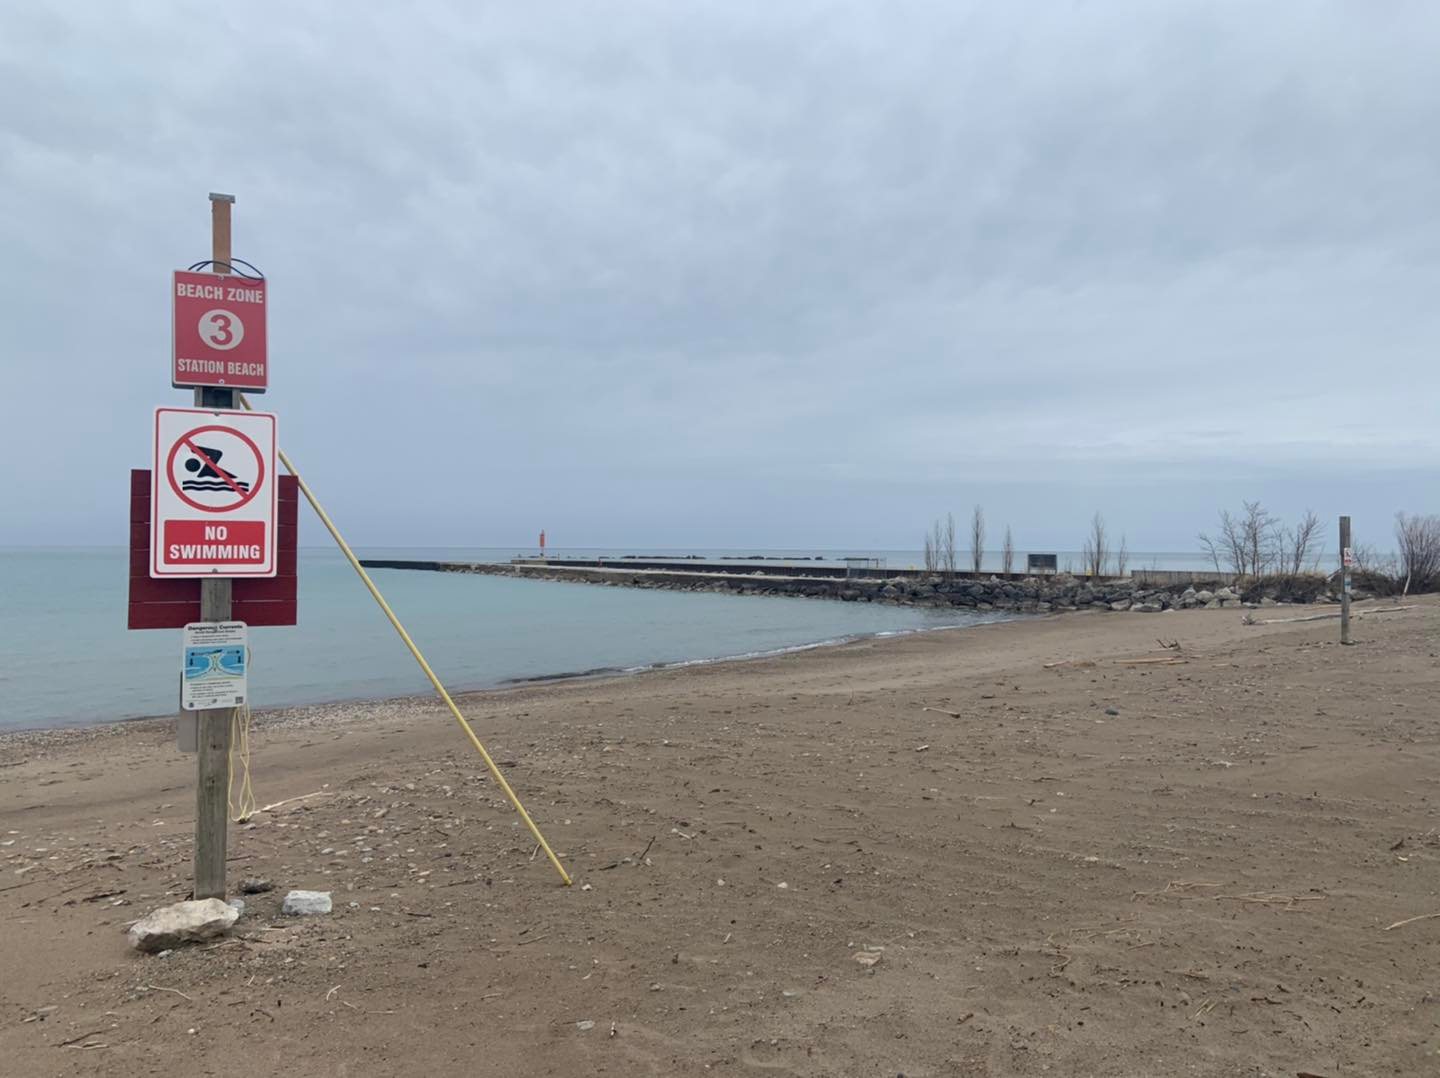 kincardine fire emergency services reminds residents importance of water safety